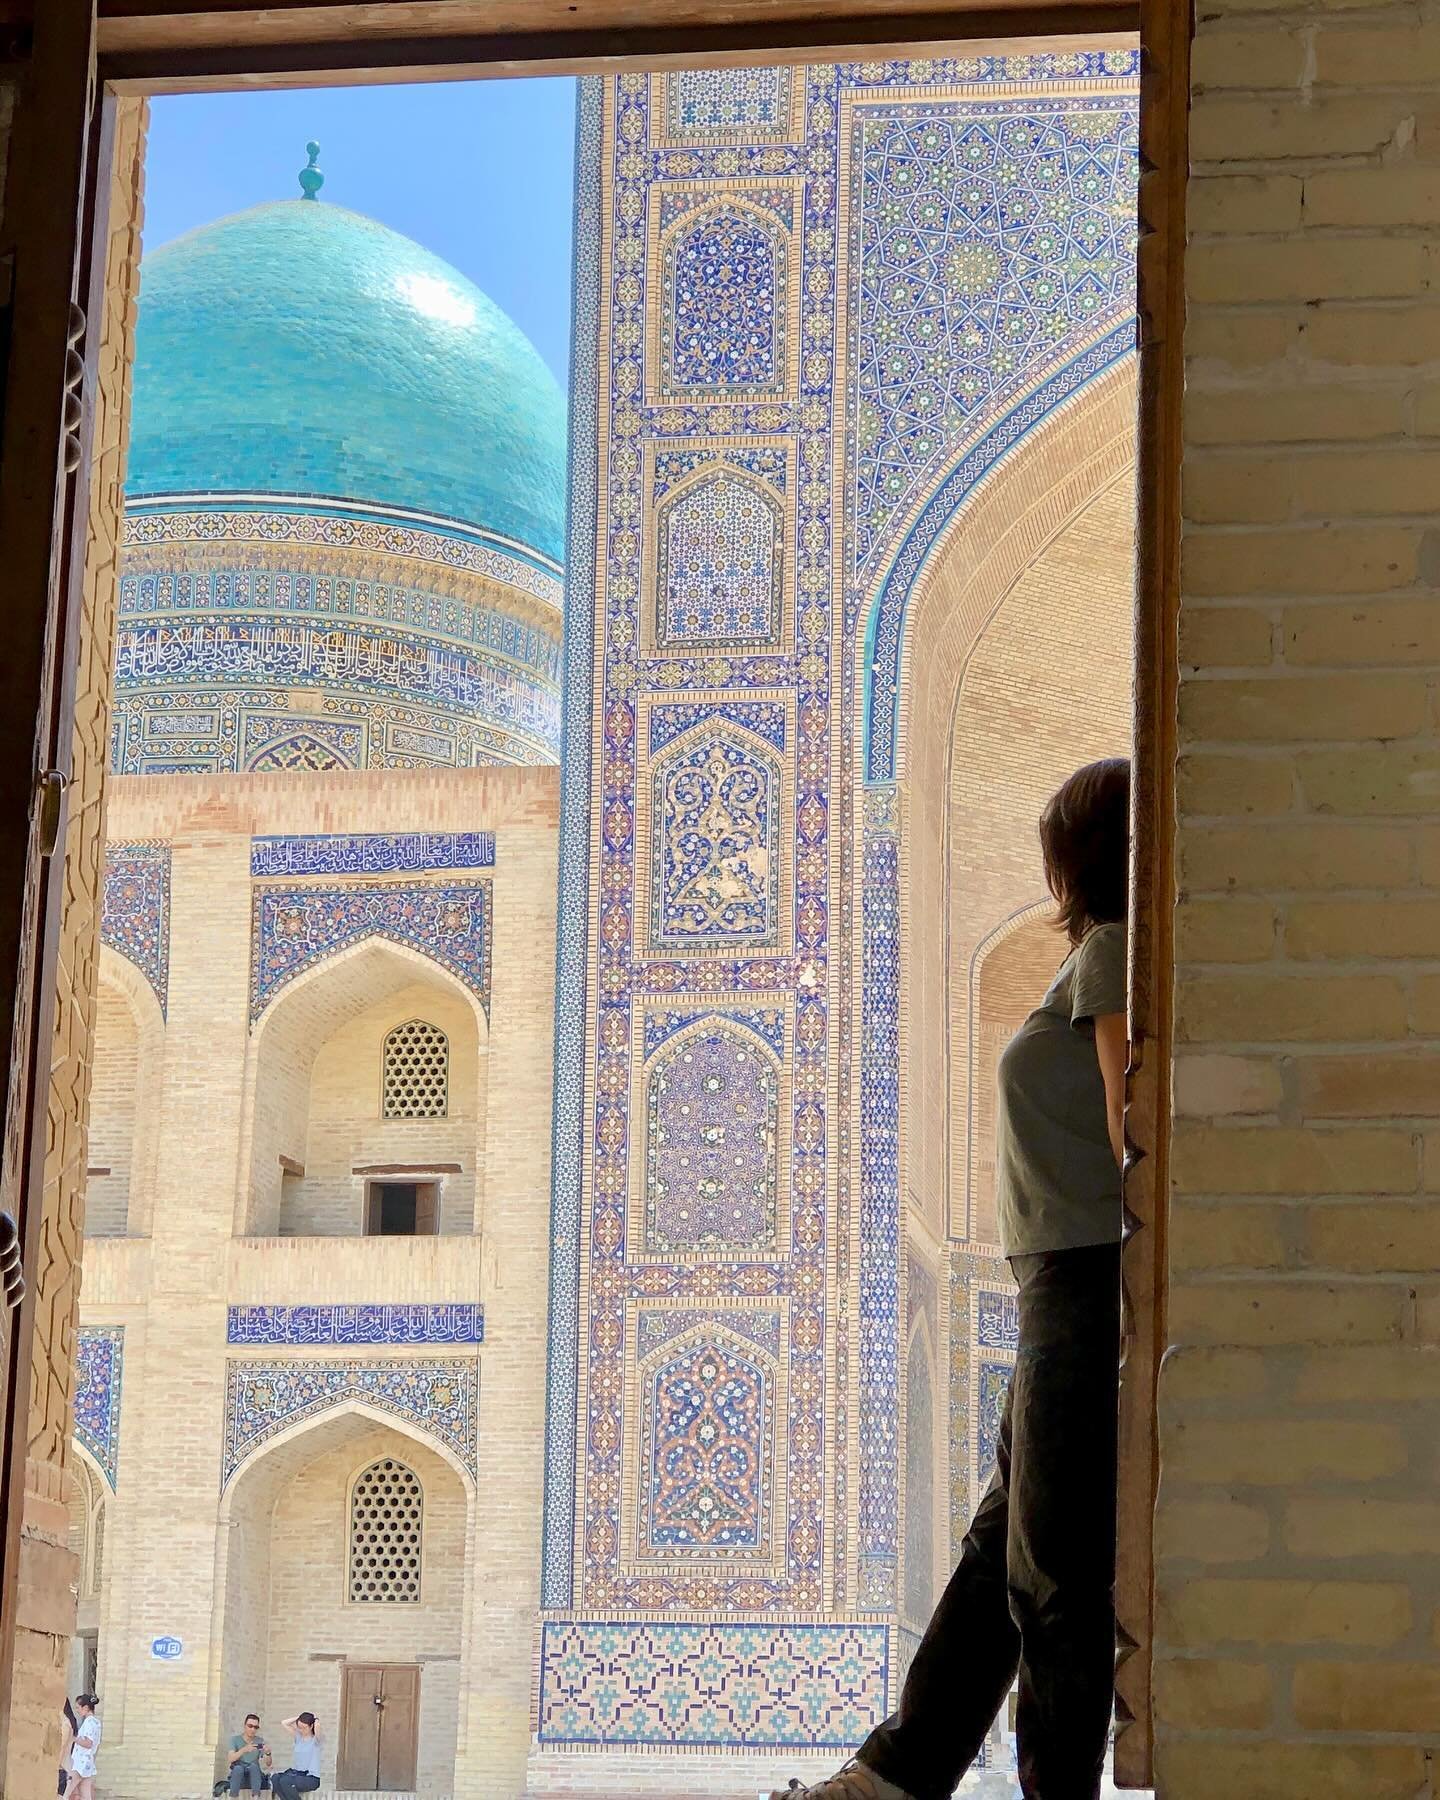 Looking forward to heading back to Uzbekistan in September to re-visit some wonderful architectural sites and discover new ones. There may even be the chance for new needlepoint pieces to meet their walls of inspiration! 

#islamictiles #islamicarchi